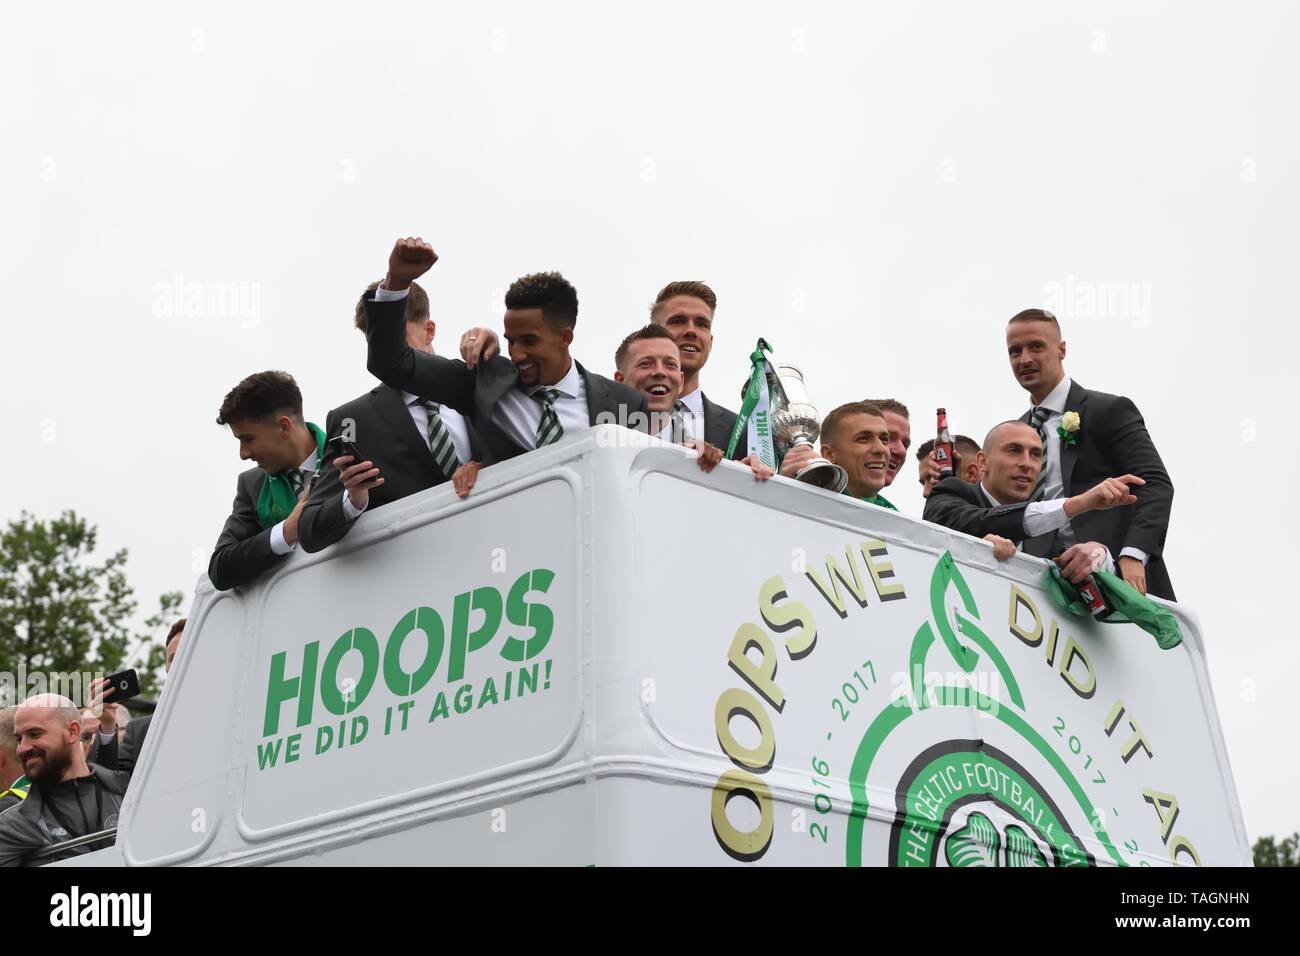 25th May, 2019. Glasgow, Scotland, UK, Europe. Scottish Cup winners, Celtic Football Club celebrate their achievement of three consecutive seasons of domestic trophy clean sweeps. The first time a domestic club has completed the triple treble in world football. Pictured are the club captain and players aboard and open top bus parade through the streets of Glasgow. Stock Photo